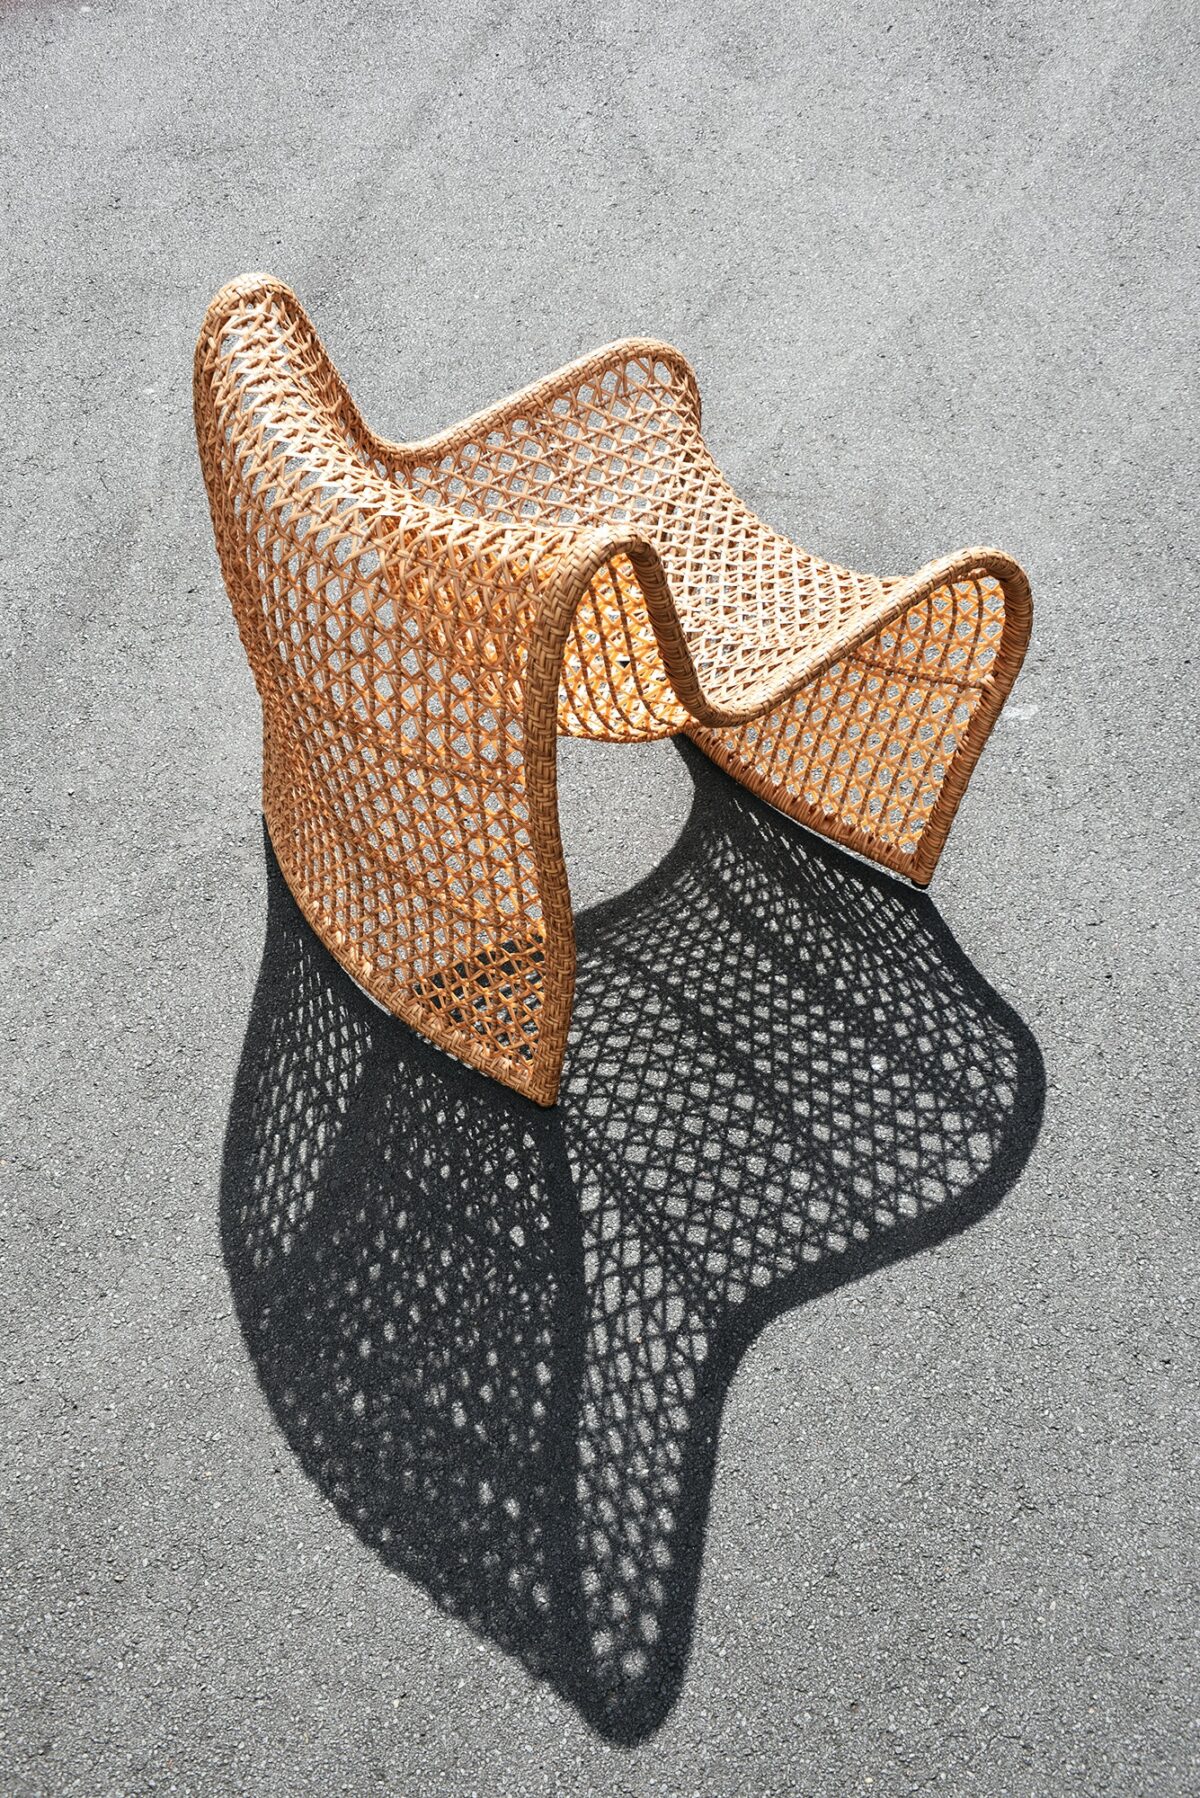 Wave Outdoor Chair